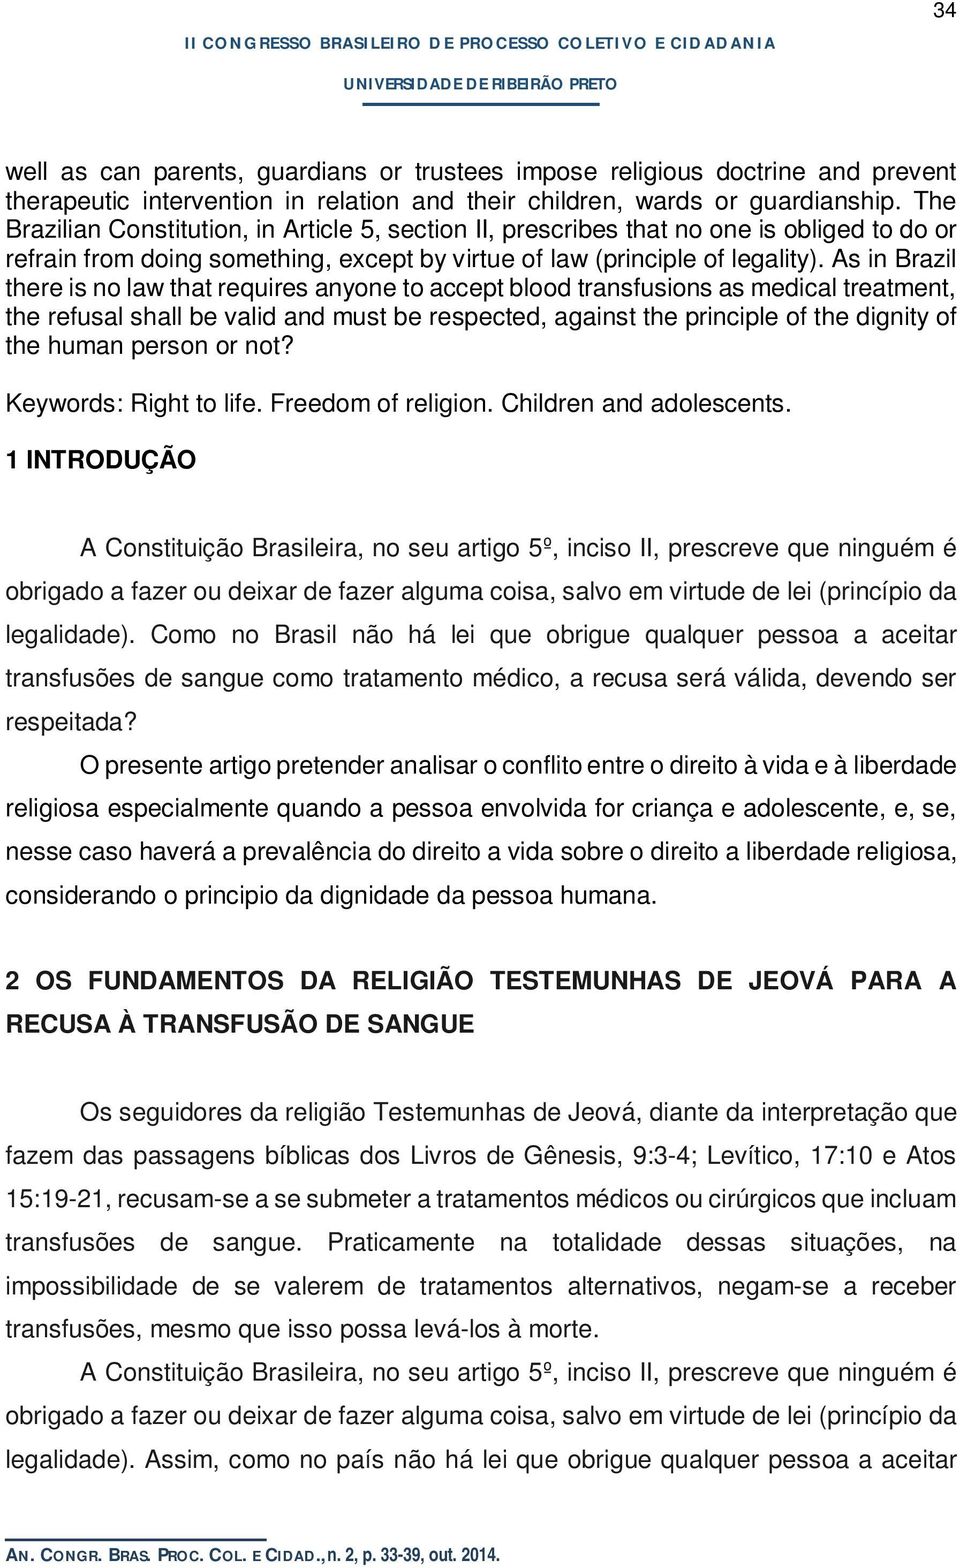 As in Brazil there is no law that requires anyone to accept blood transfusions as medical treatment, the refusal shall be valid and must be respected, against the principle of the dignity of the